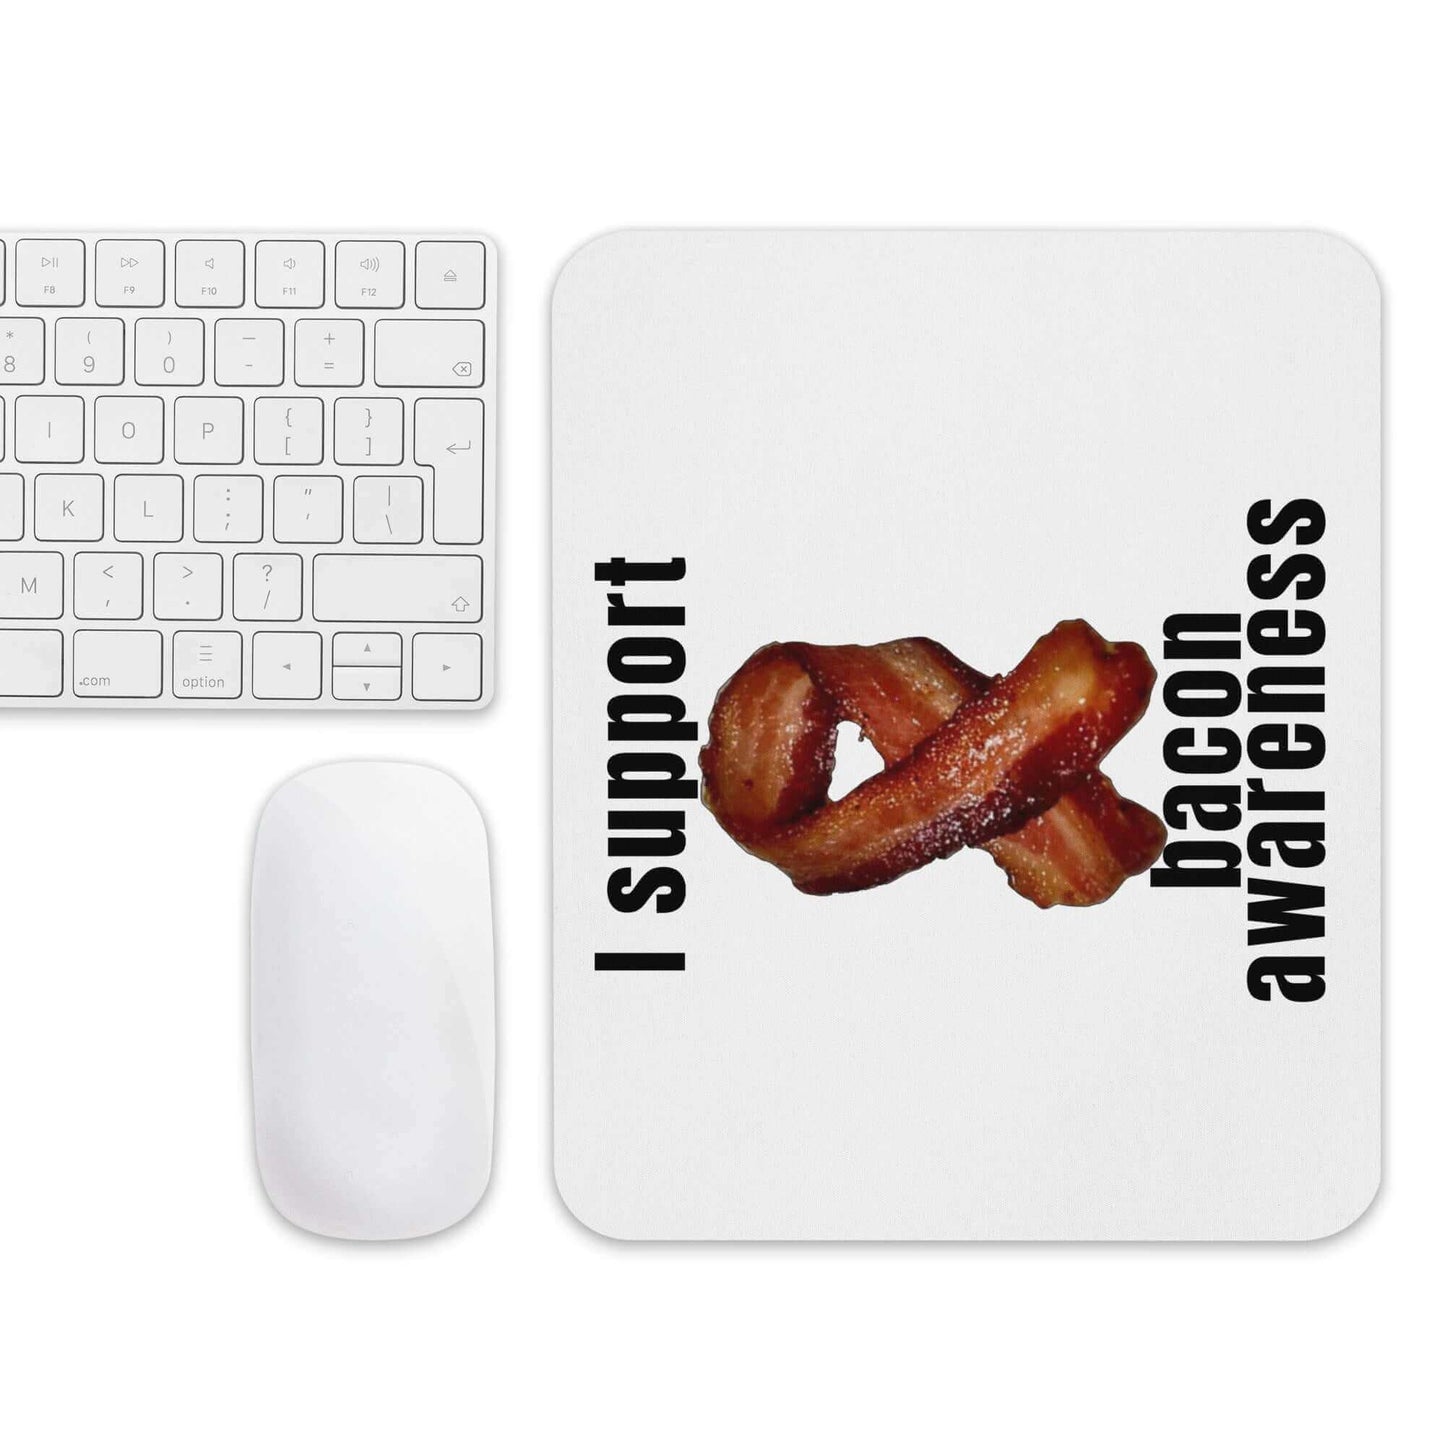 I support bacon awareness - Mouse pad - Horrible Designs